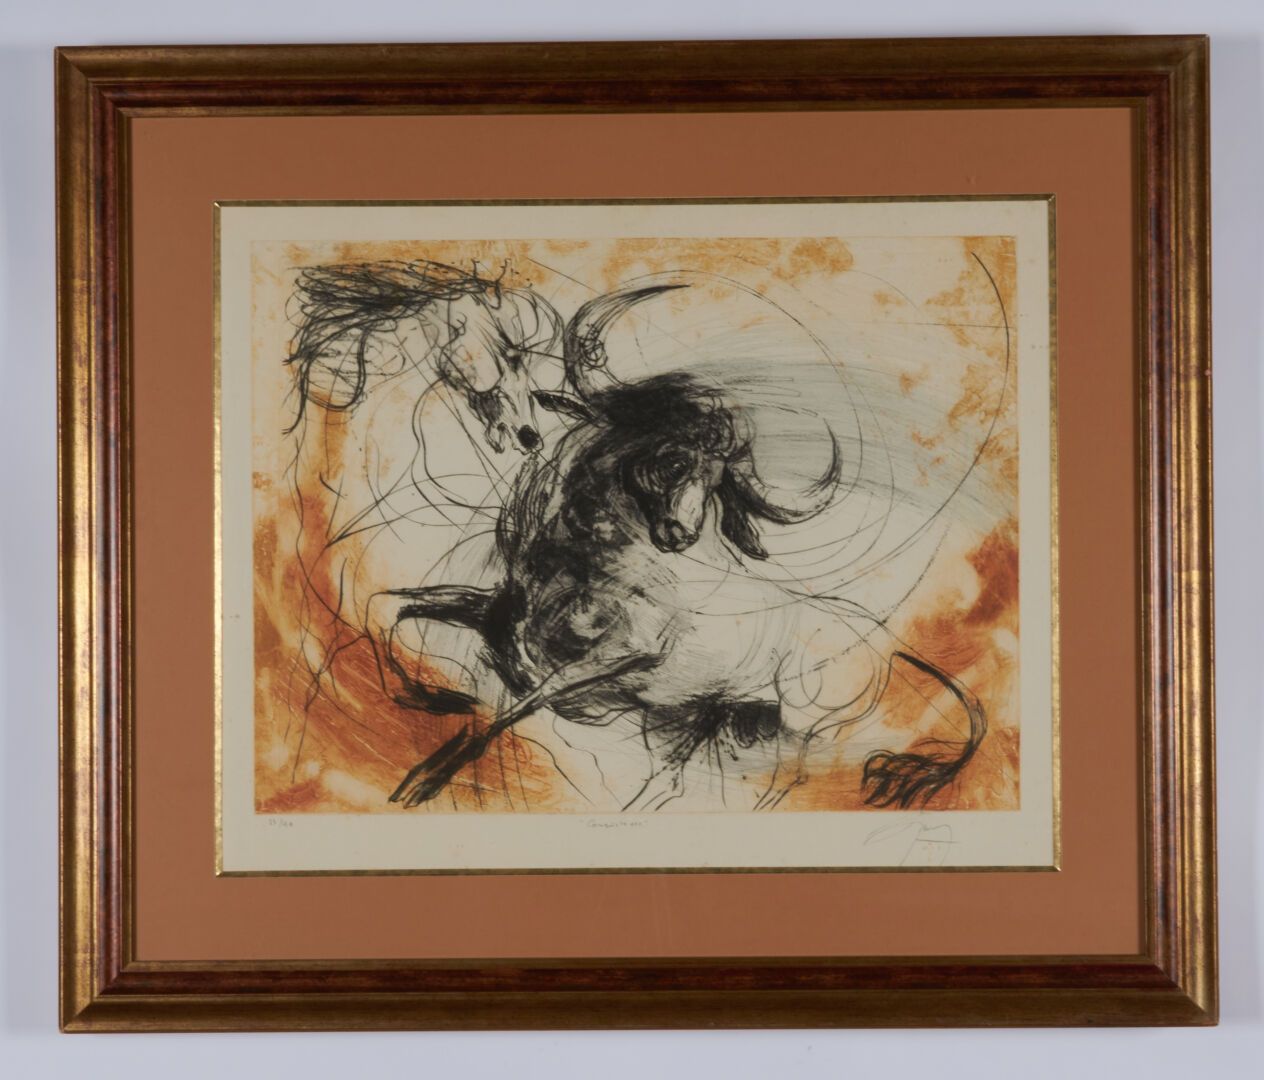 Null GUINY Jean Marie (1954-2010)

Lithographie "Stier" - 52x66